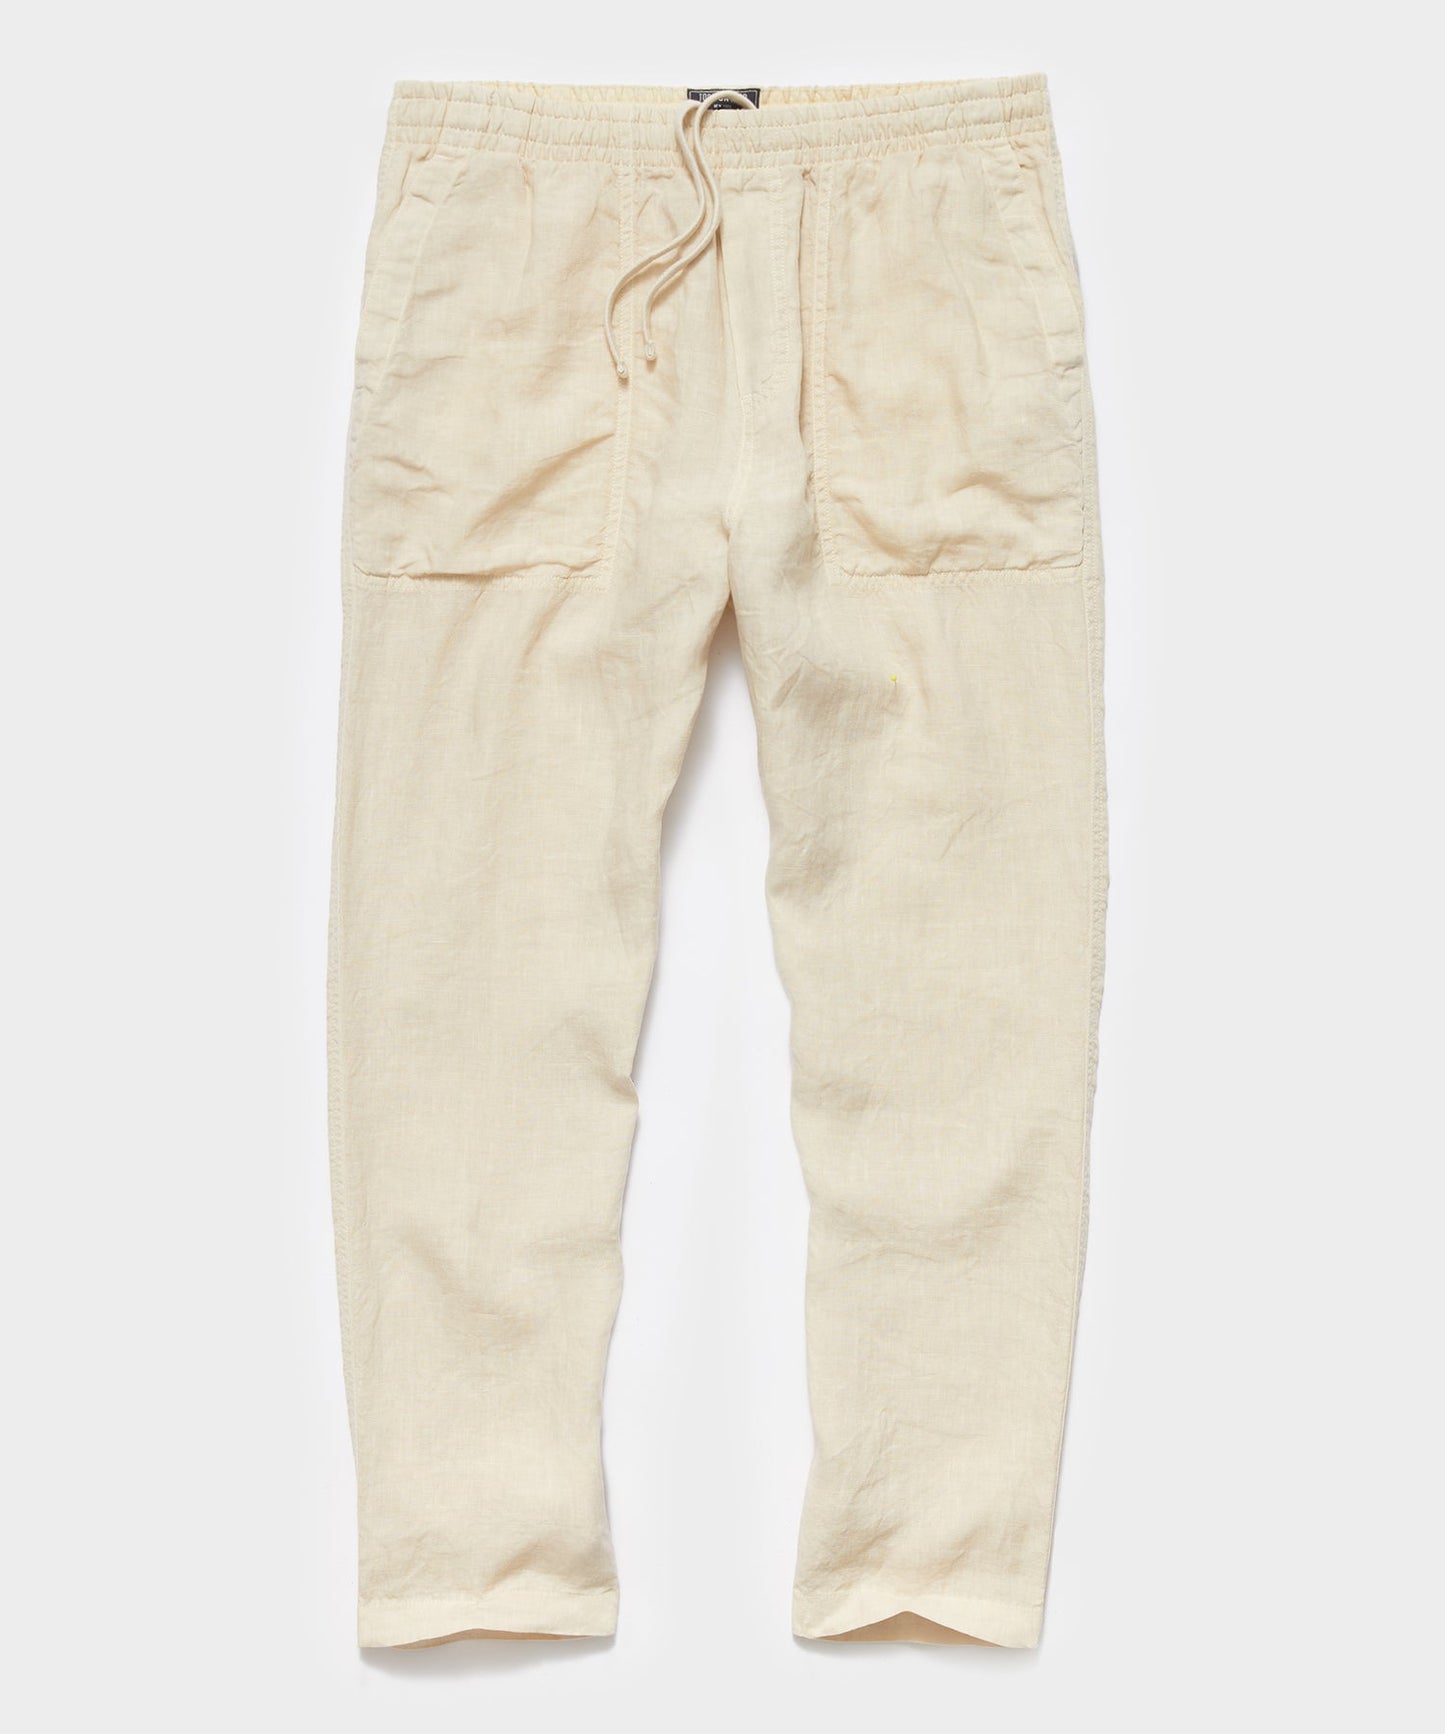 Todd Snyder - TODD SNYDER ITALIAN LINEN BEACH PANT IN SAND DOLLAR - Rent With Thred